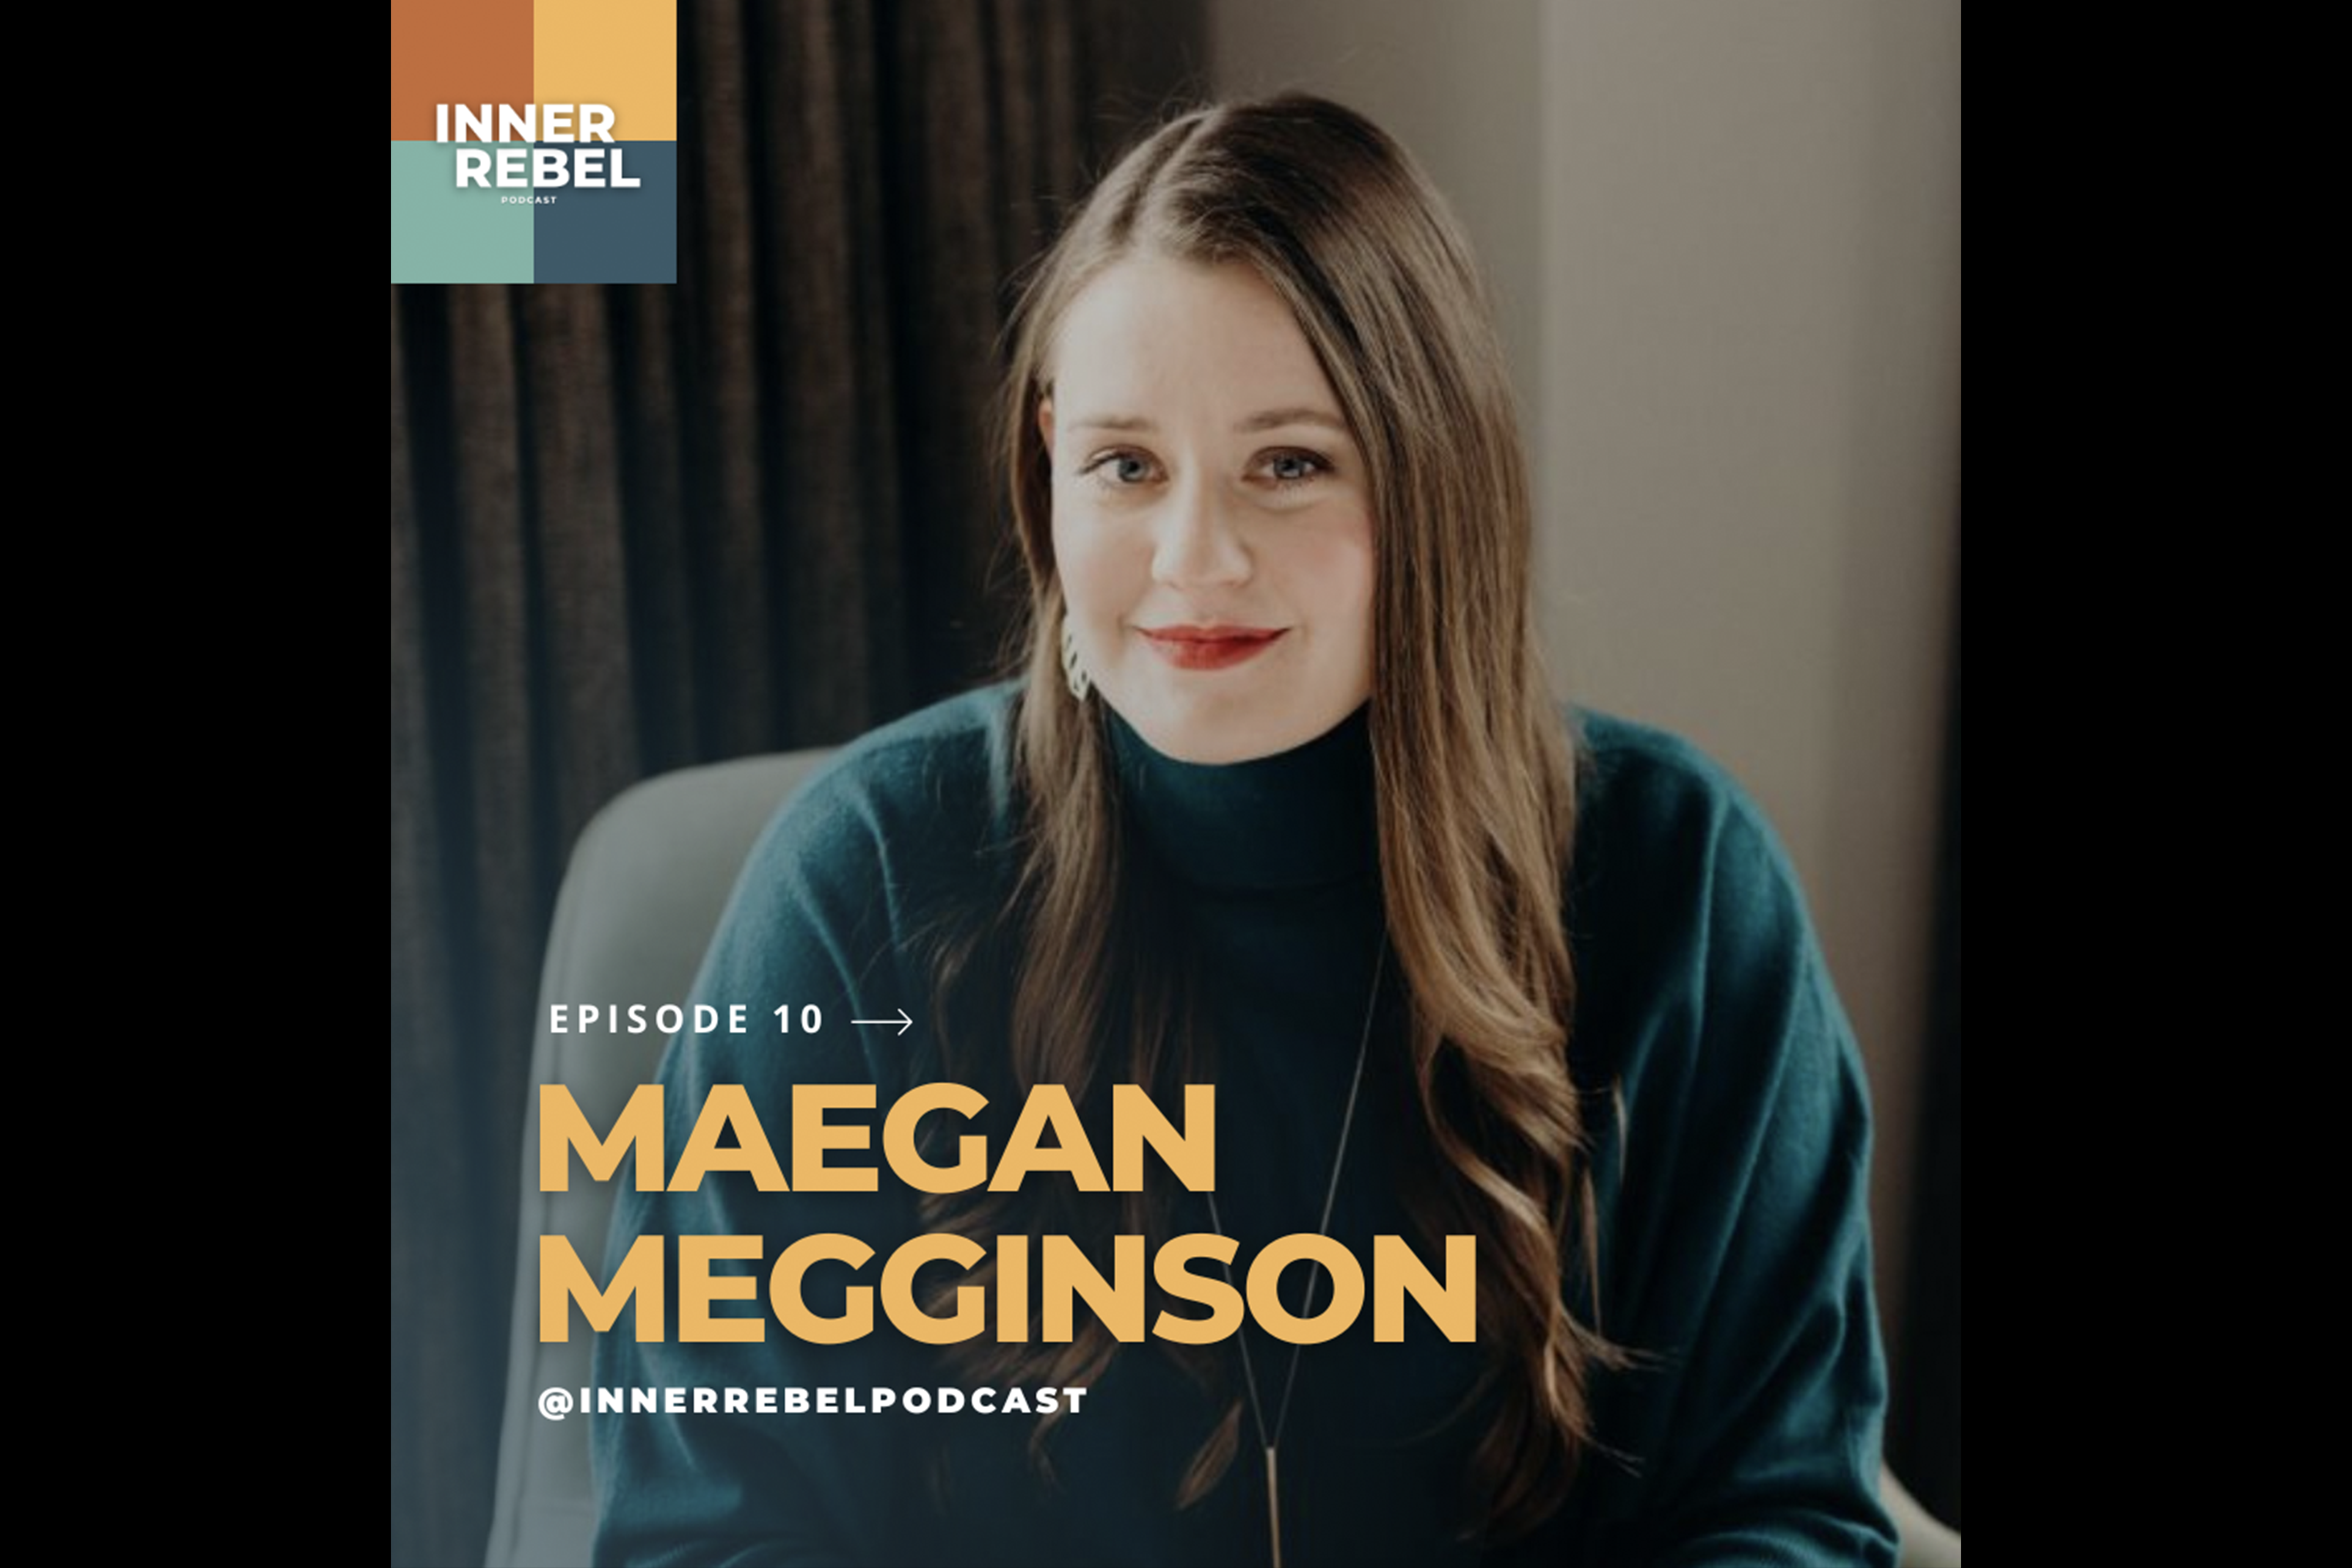 Image is a graphic for the Inner Rebel podcast and features a photo of Maegan, a white woman with long brown hair and red lipstick and the words, Episode 10, Maegan Megginson @innerrebelpodcast."